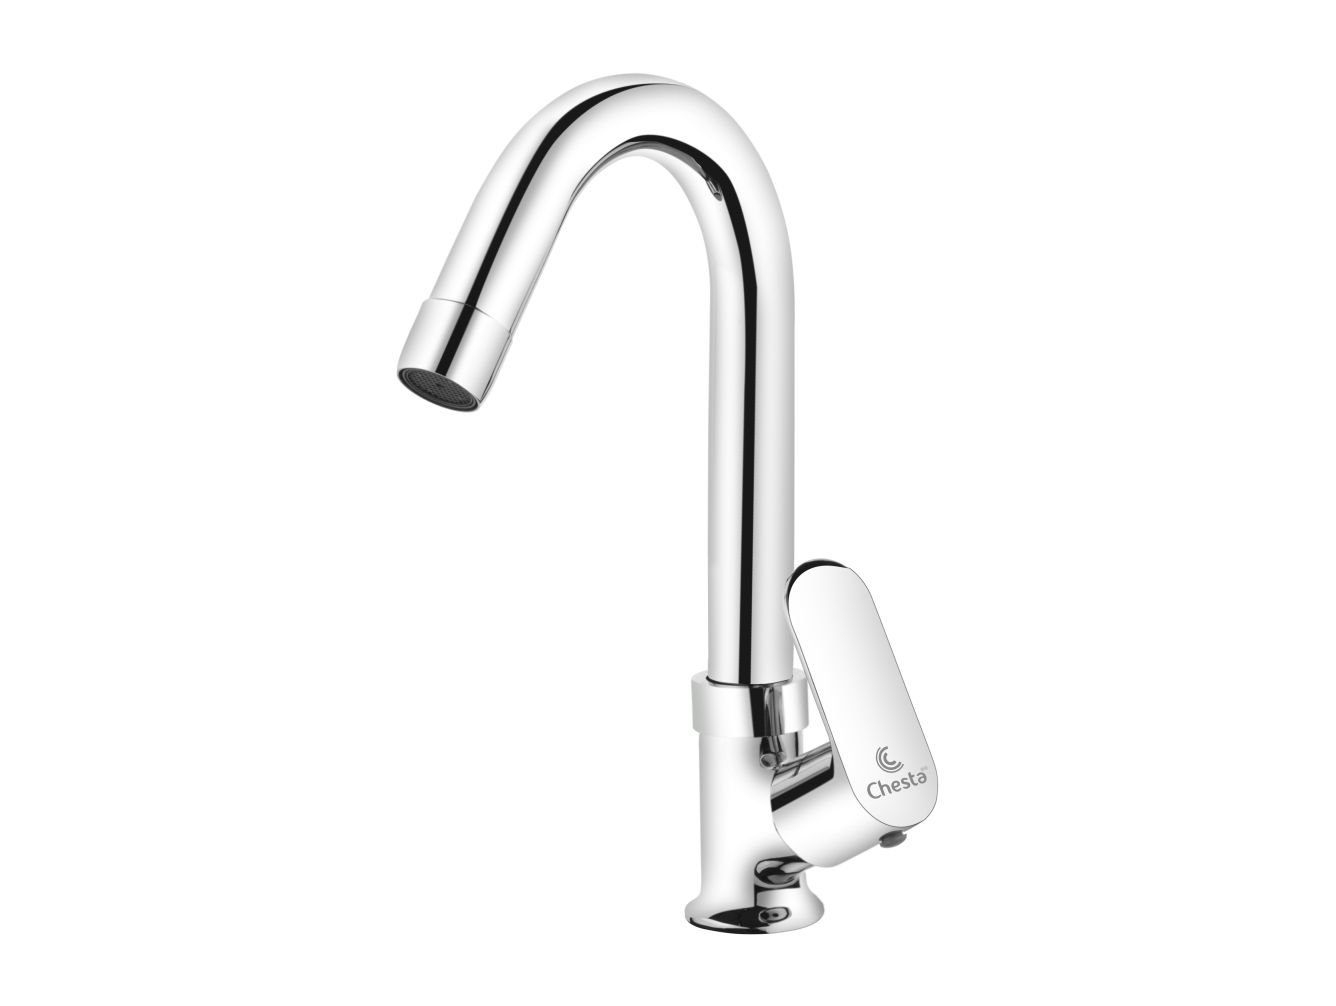 MO - 1008 - Swan Neck Faucets by Chesta Bath Fittings